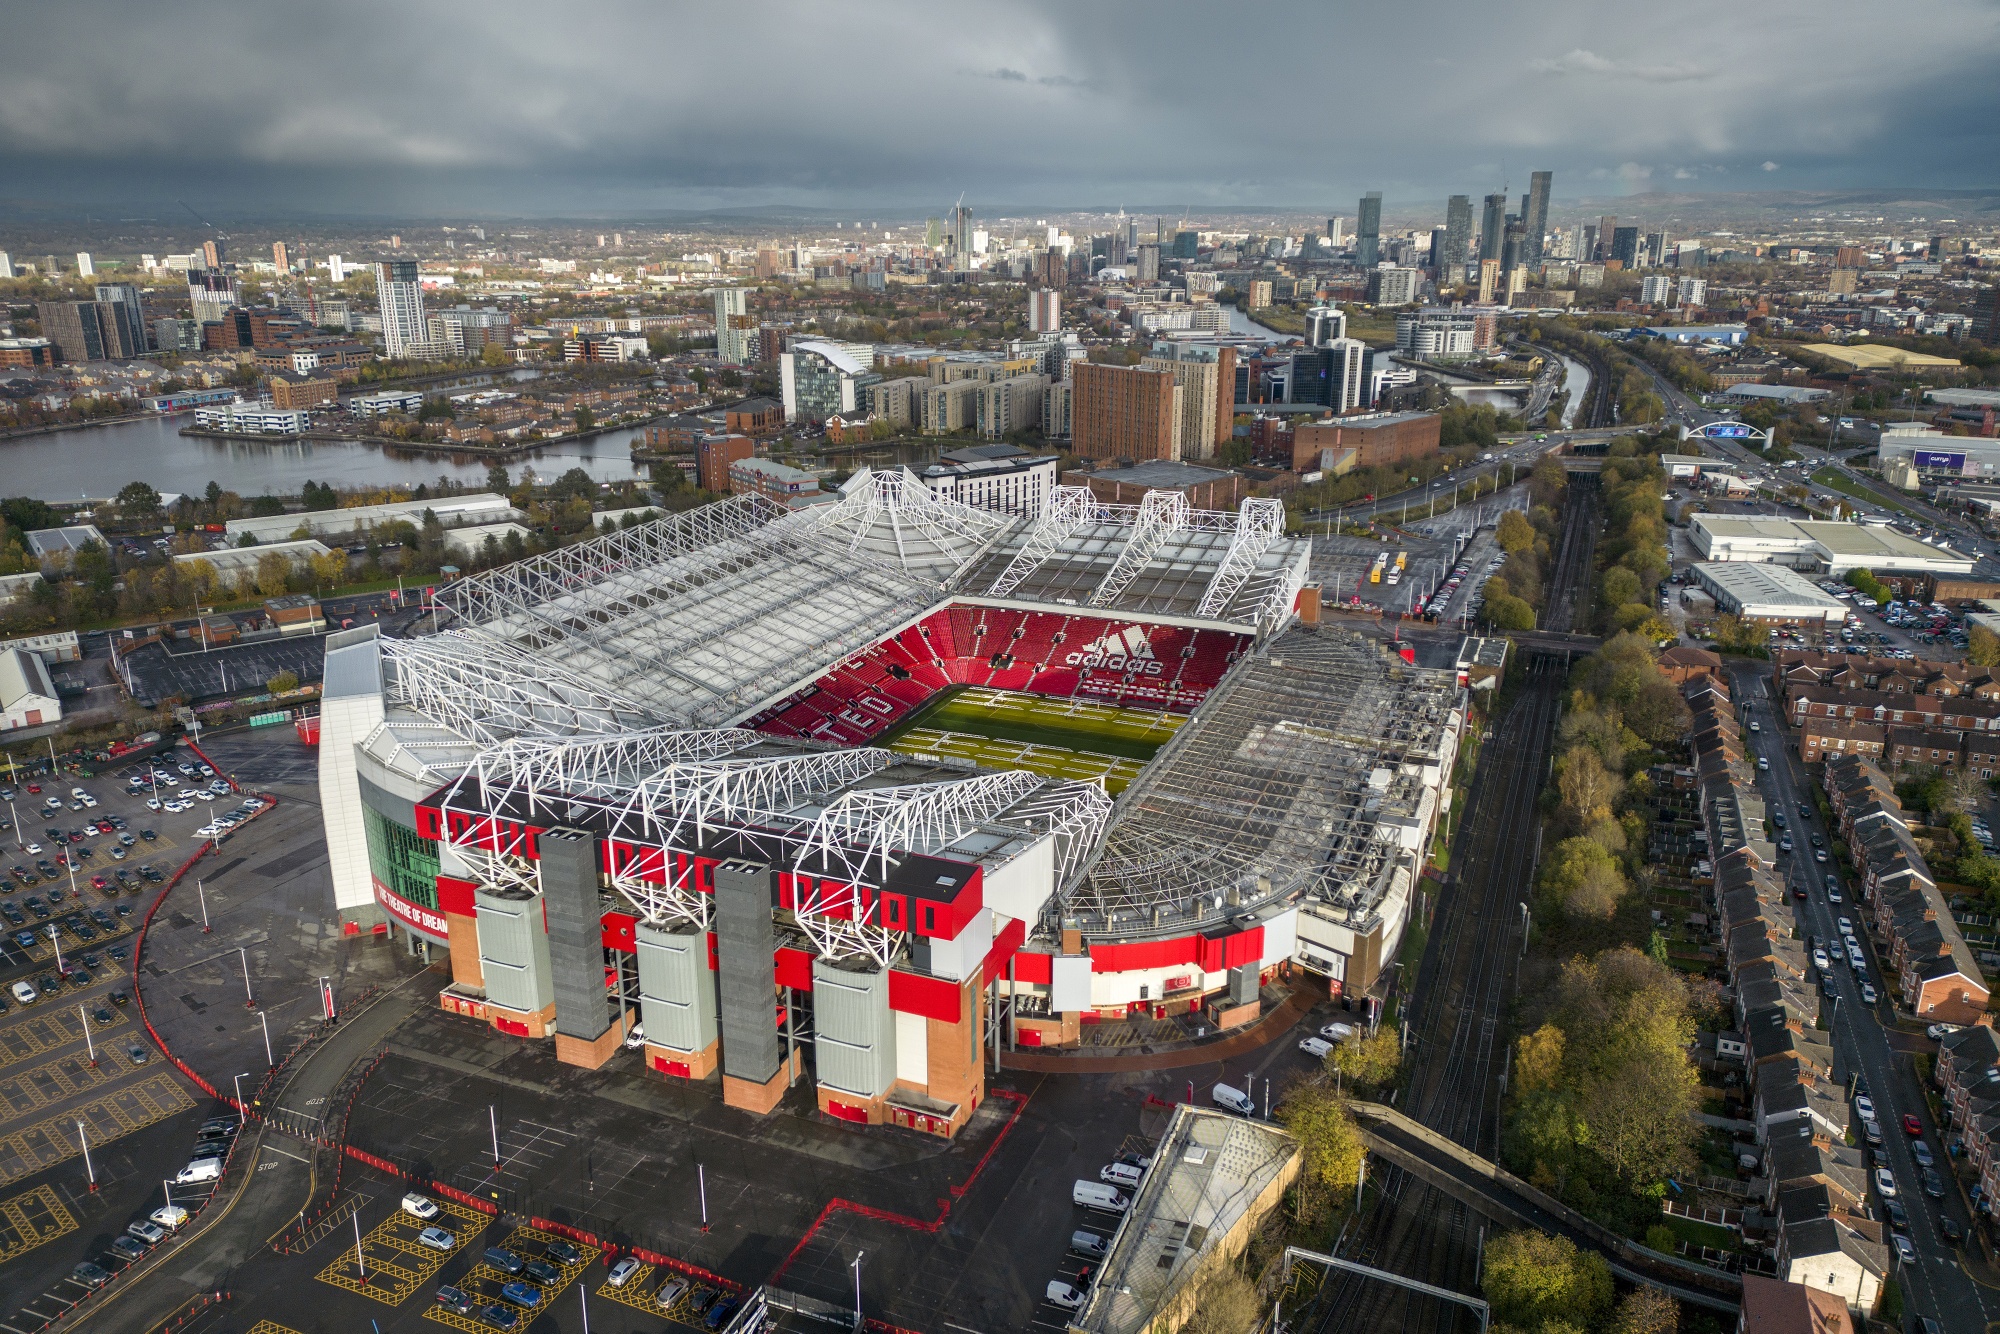 The Old Trafford Stadium, the home of Manchester United Football Club.